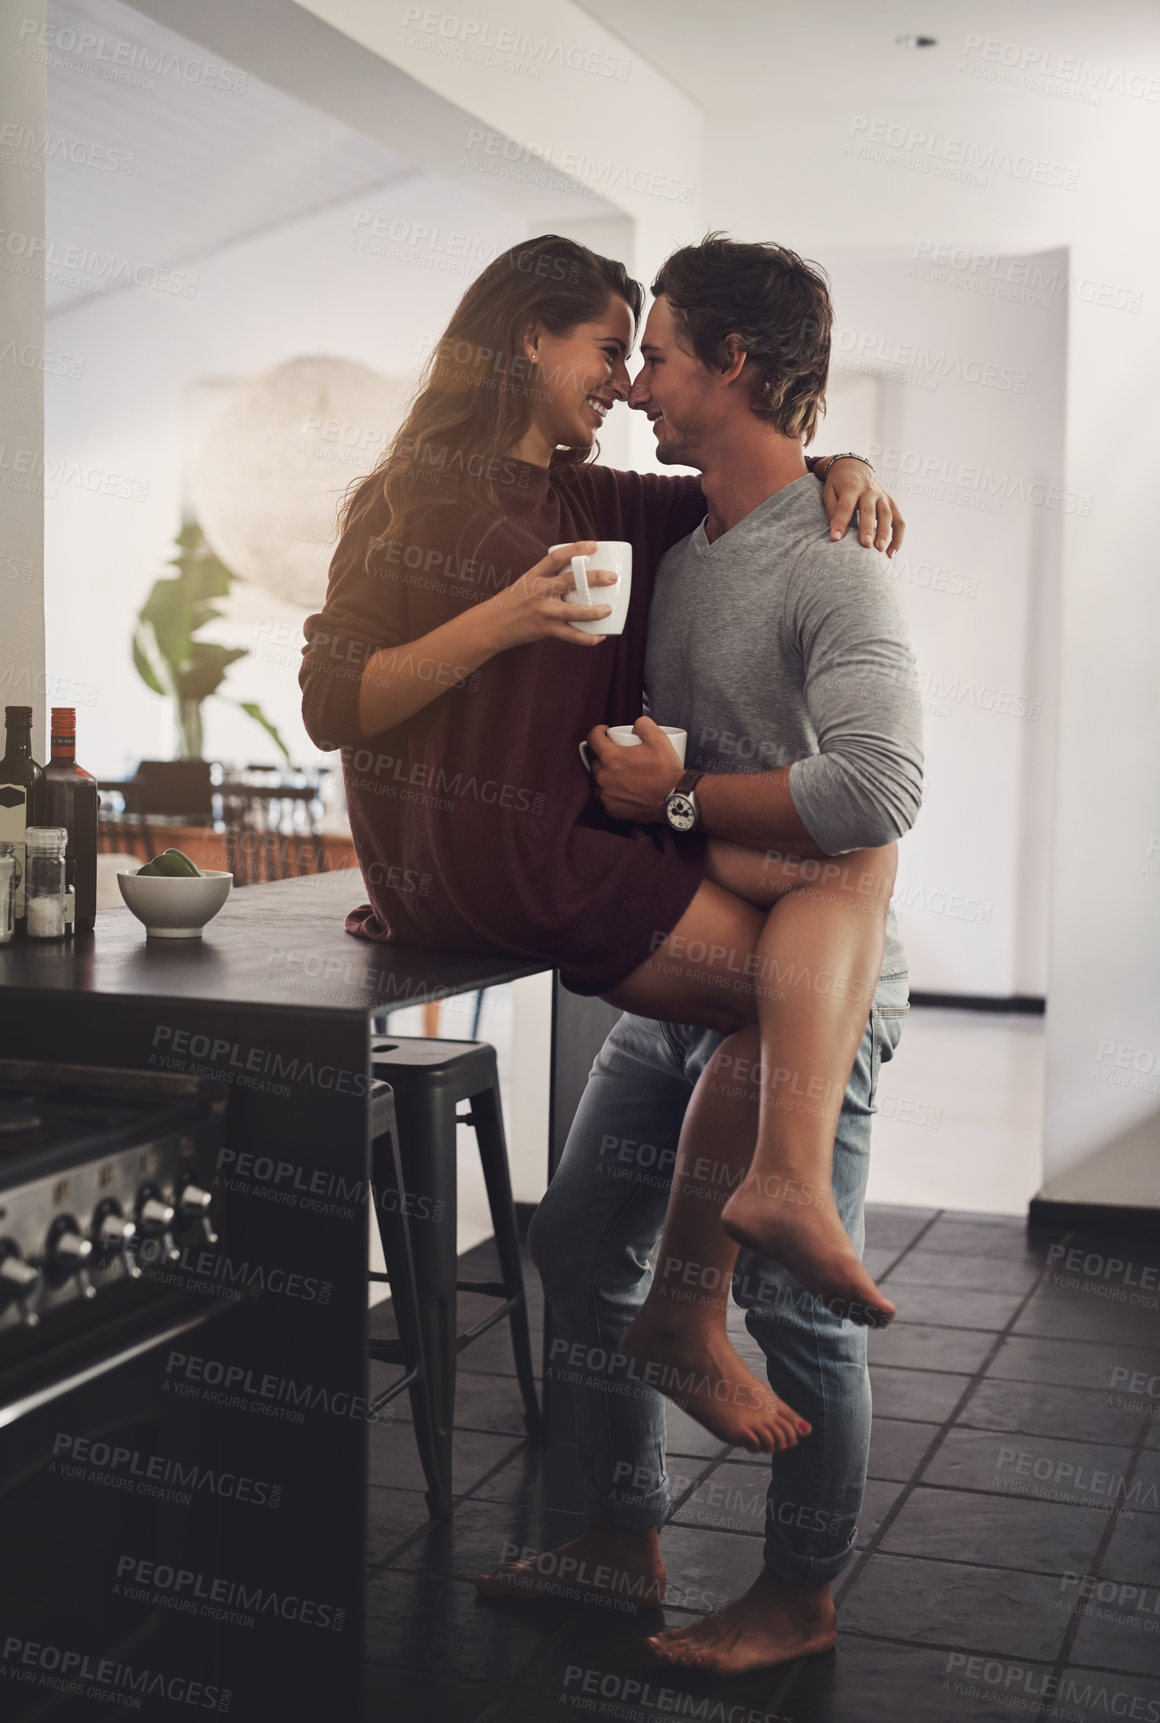 Buy stock photo Shot of an affectionate young couple having a coffee break at home